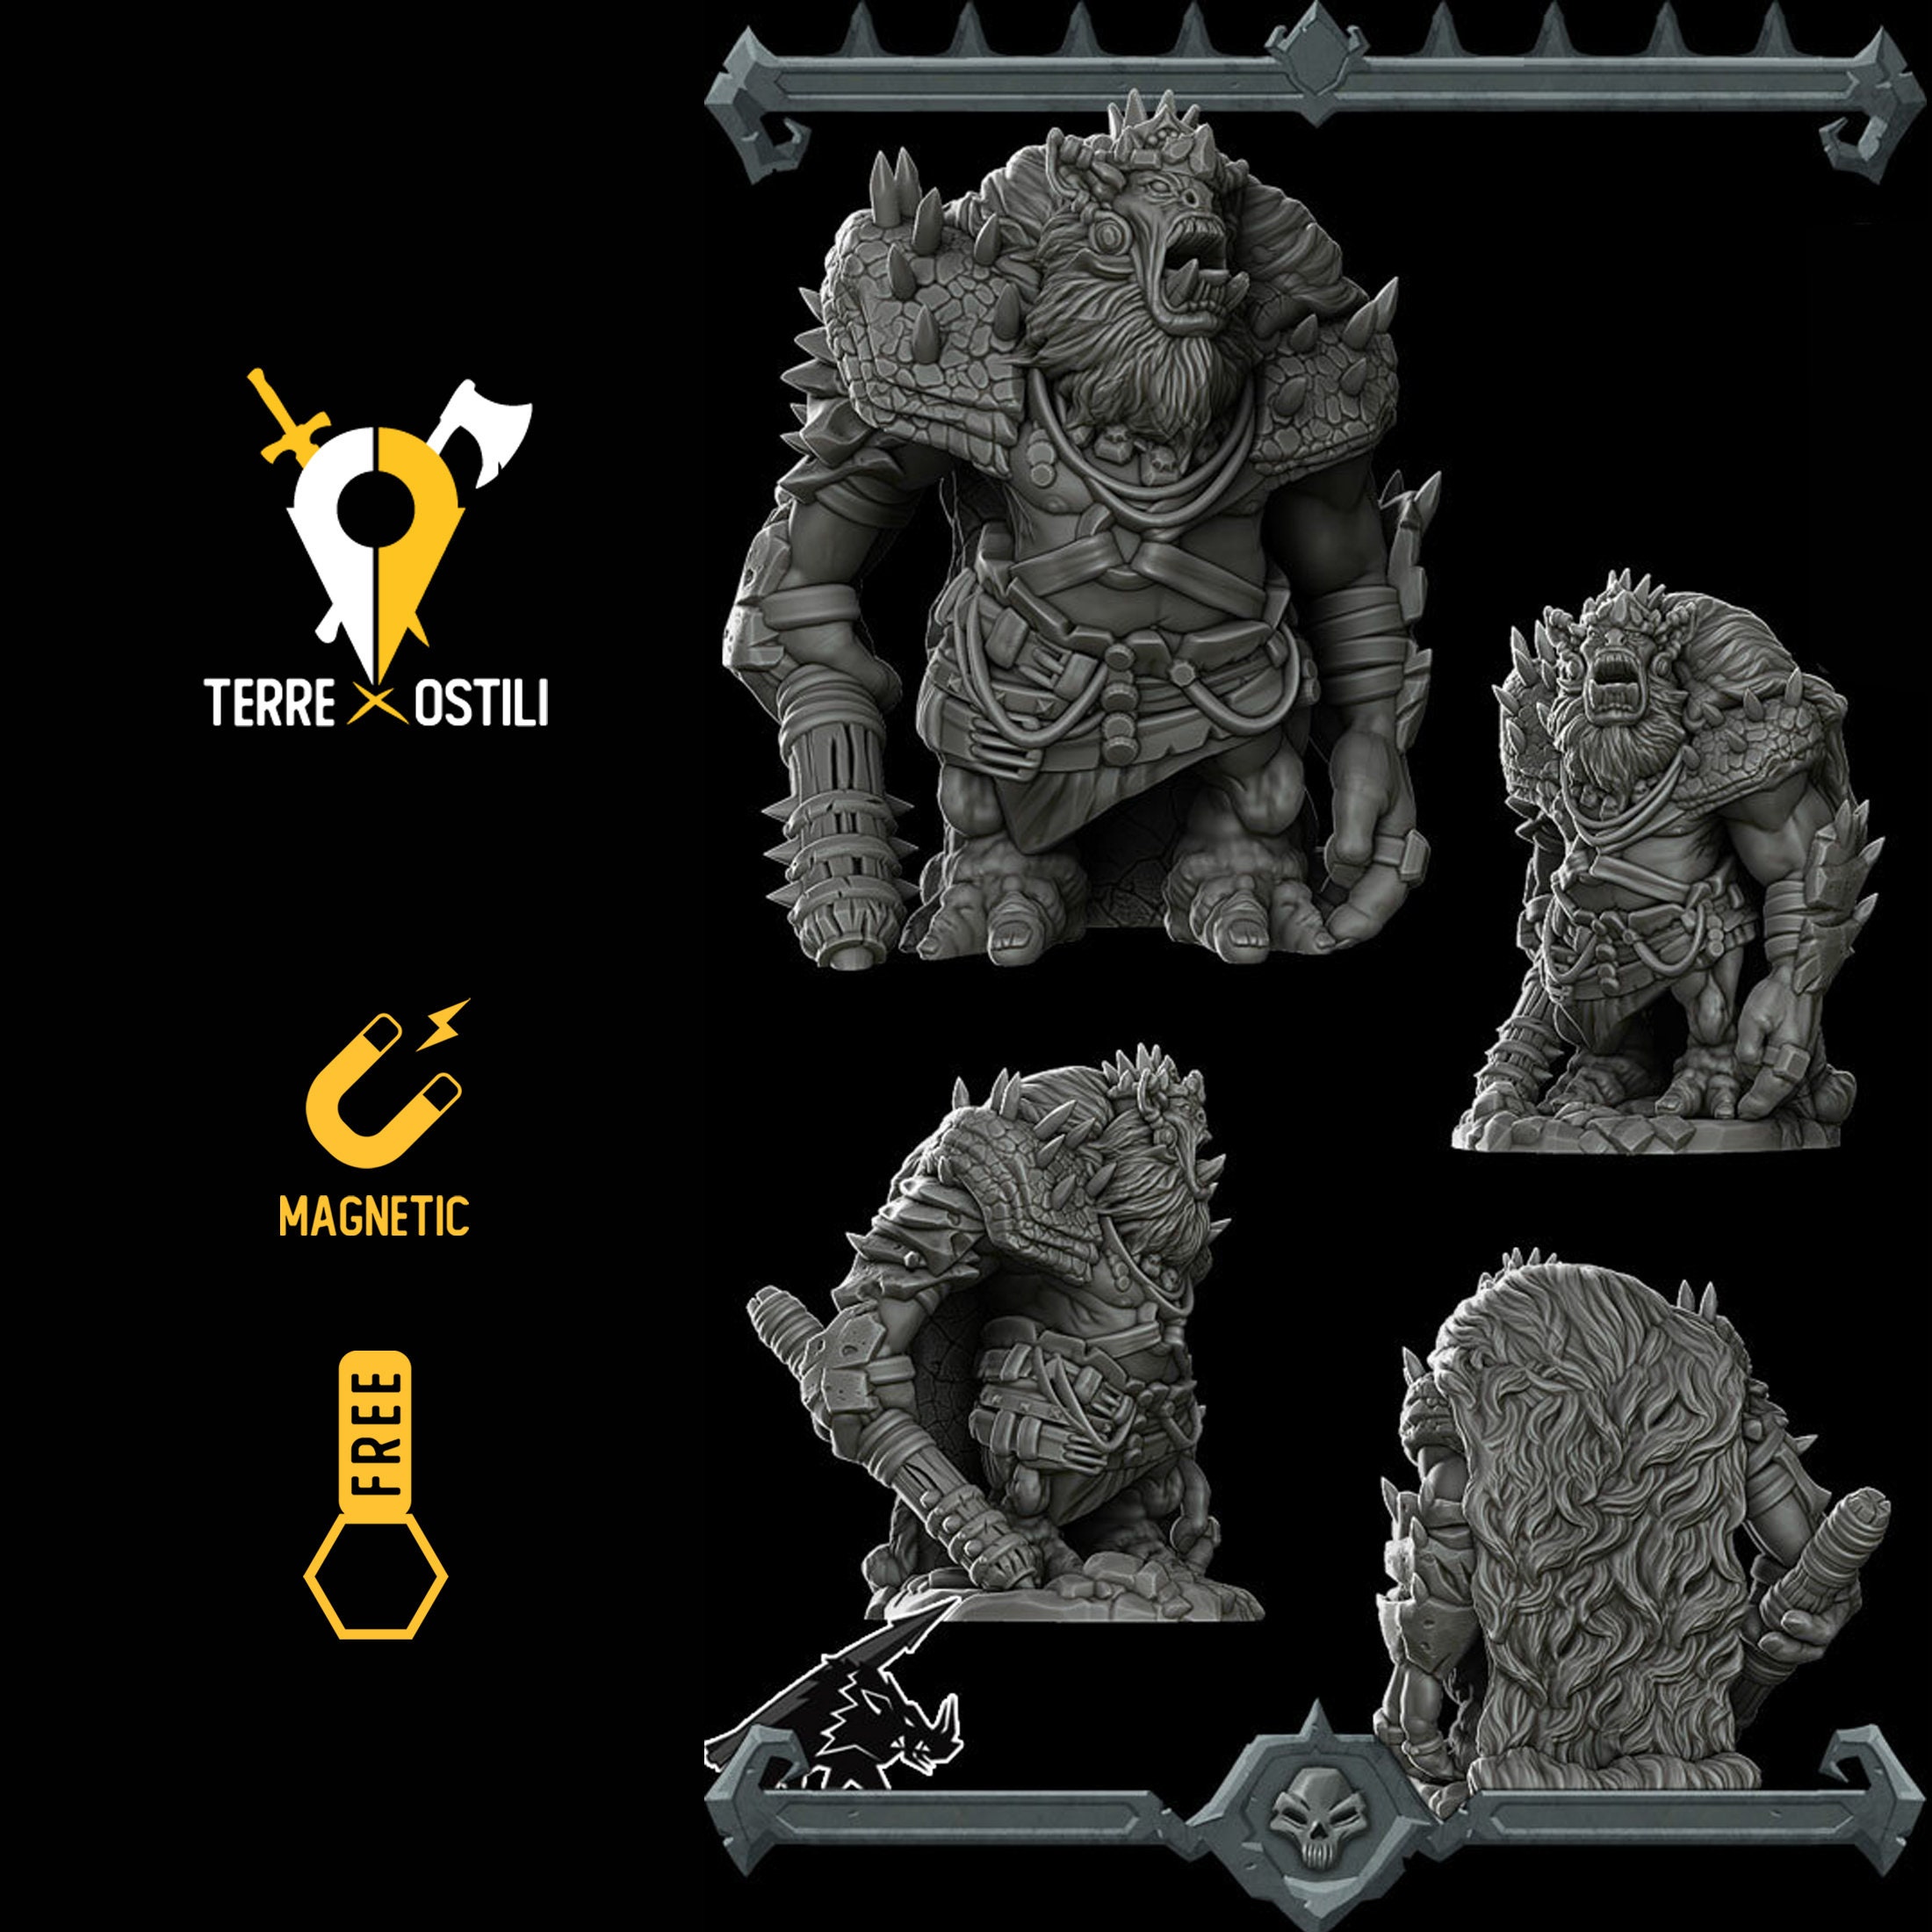 Ogre king miniature pathfinder, DnD, Dungeons and dragons, Age of